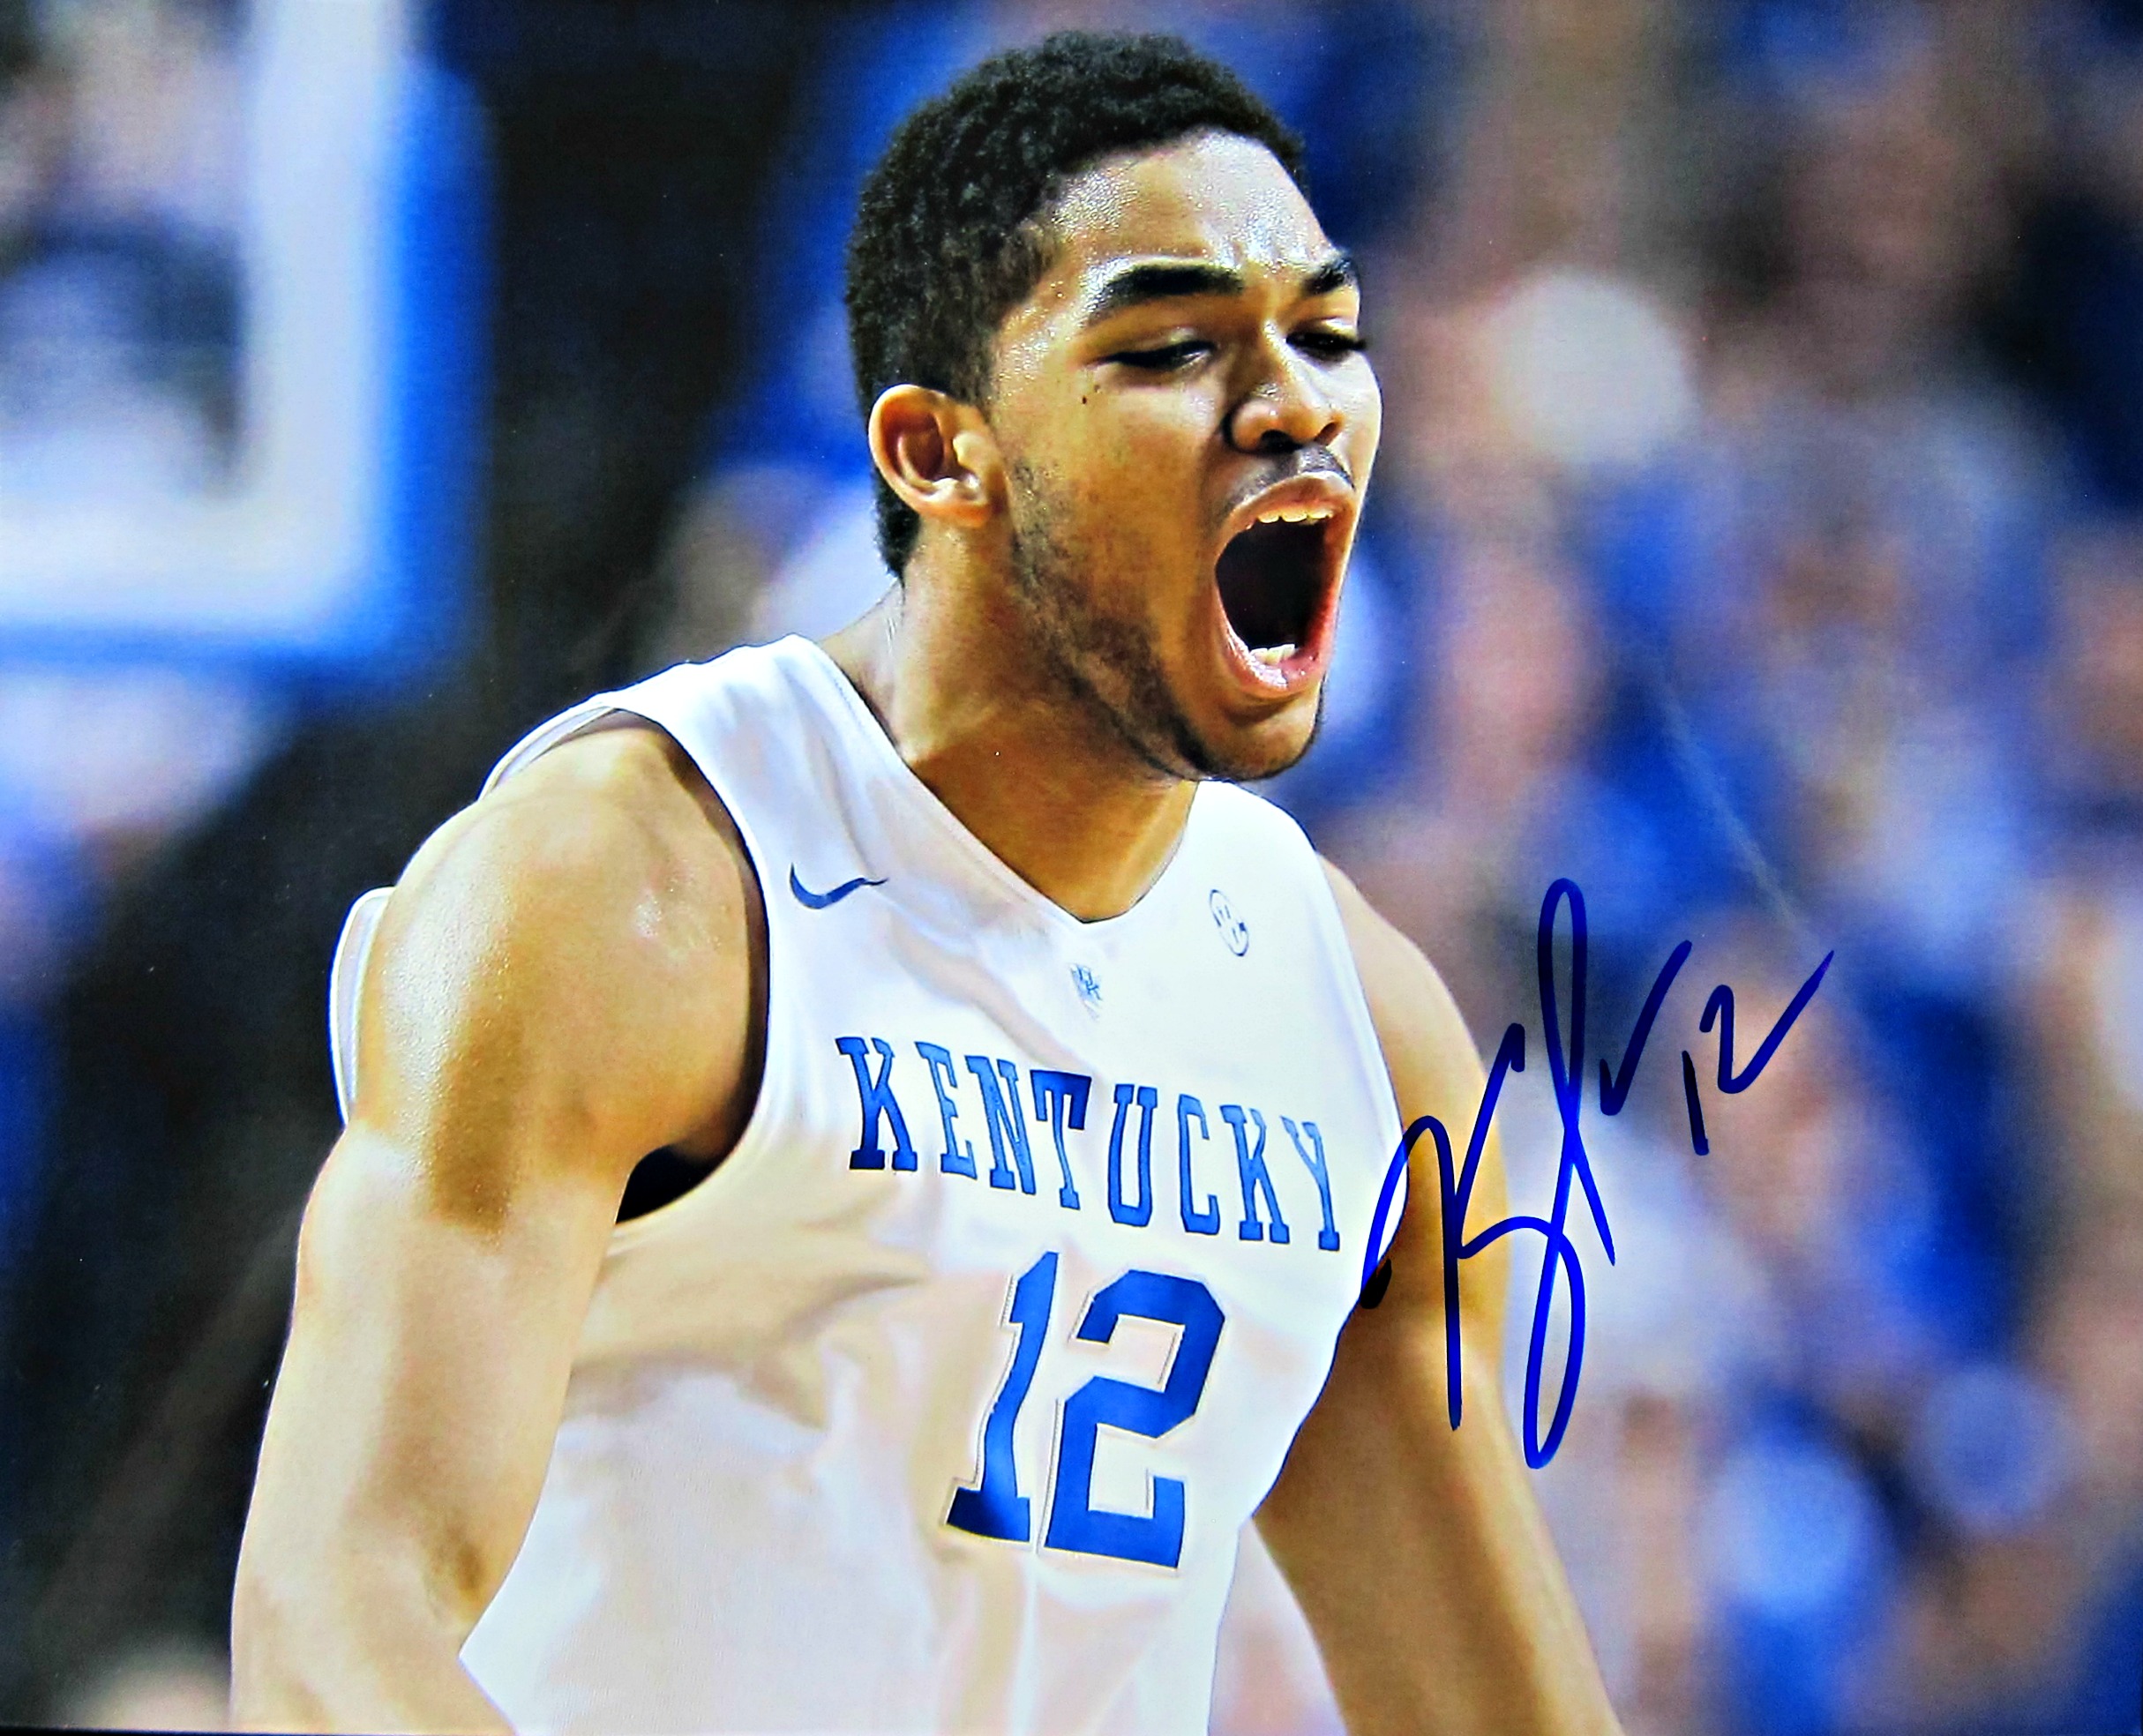 Karl Anthony Towns Autographed Photo Memorabilia Center